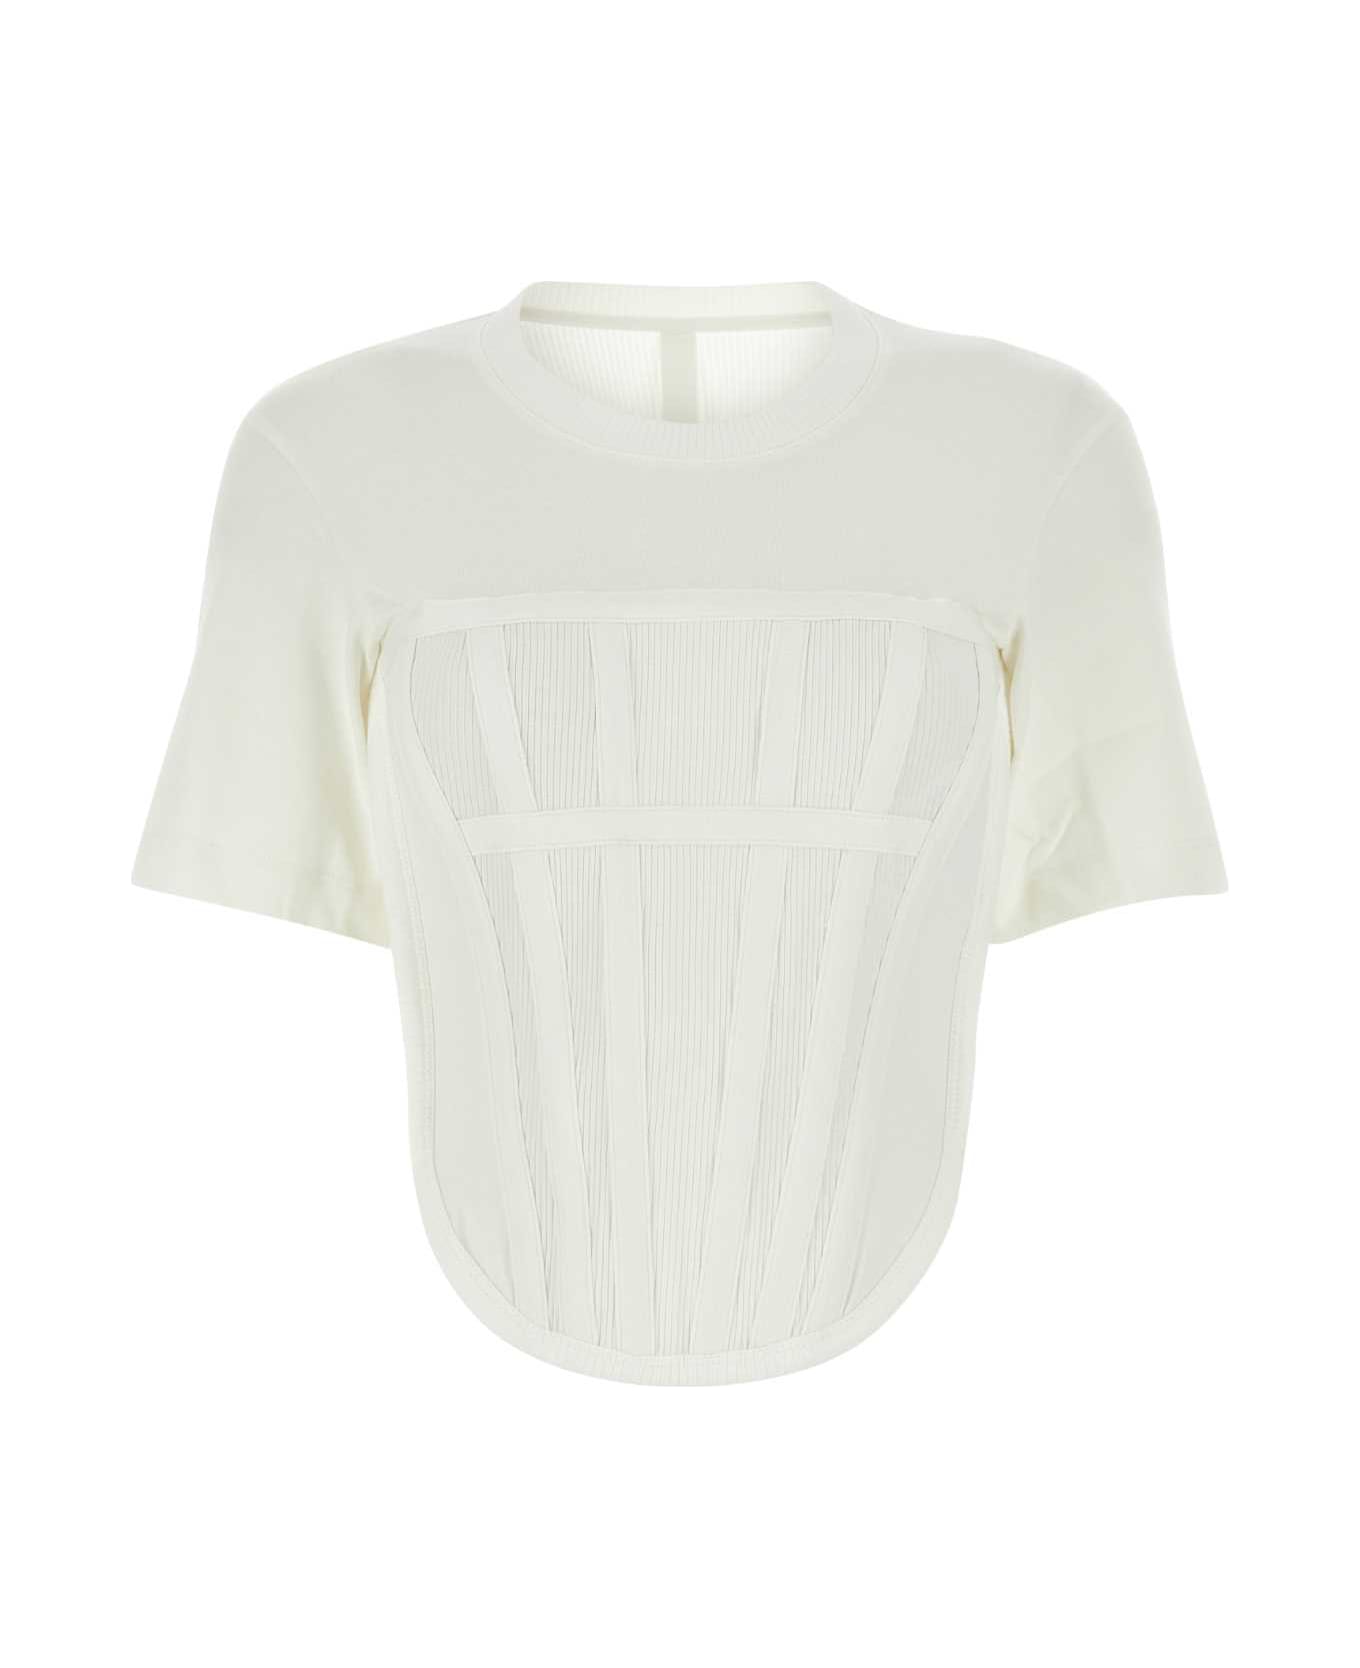 Dion Lee White Cotton T-shirt - IVORY